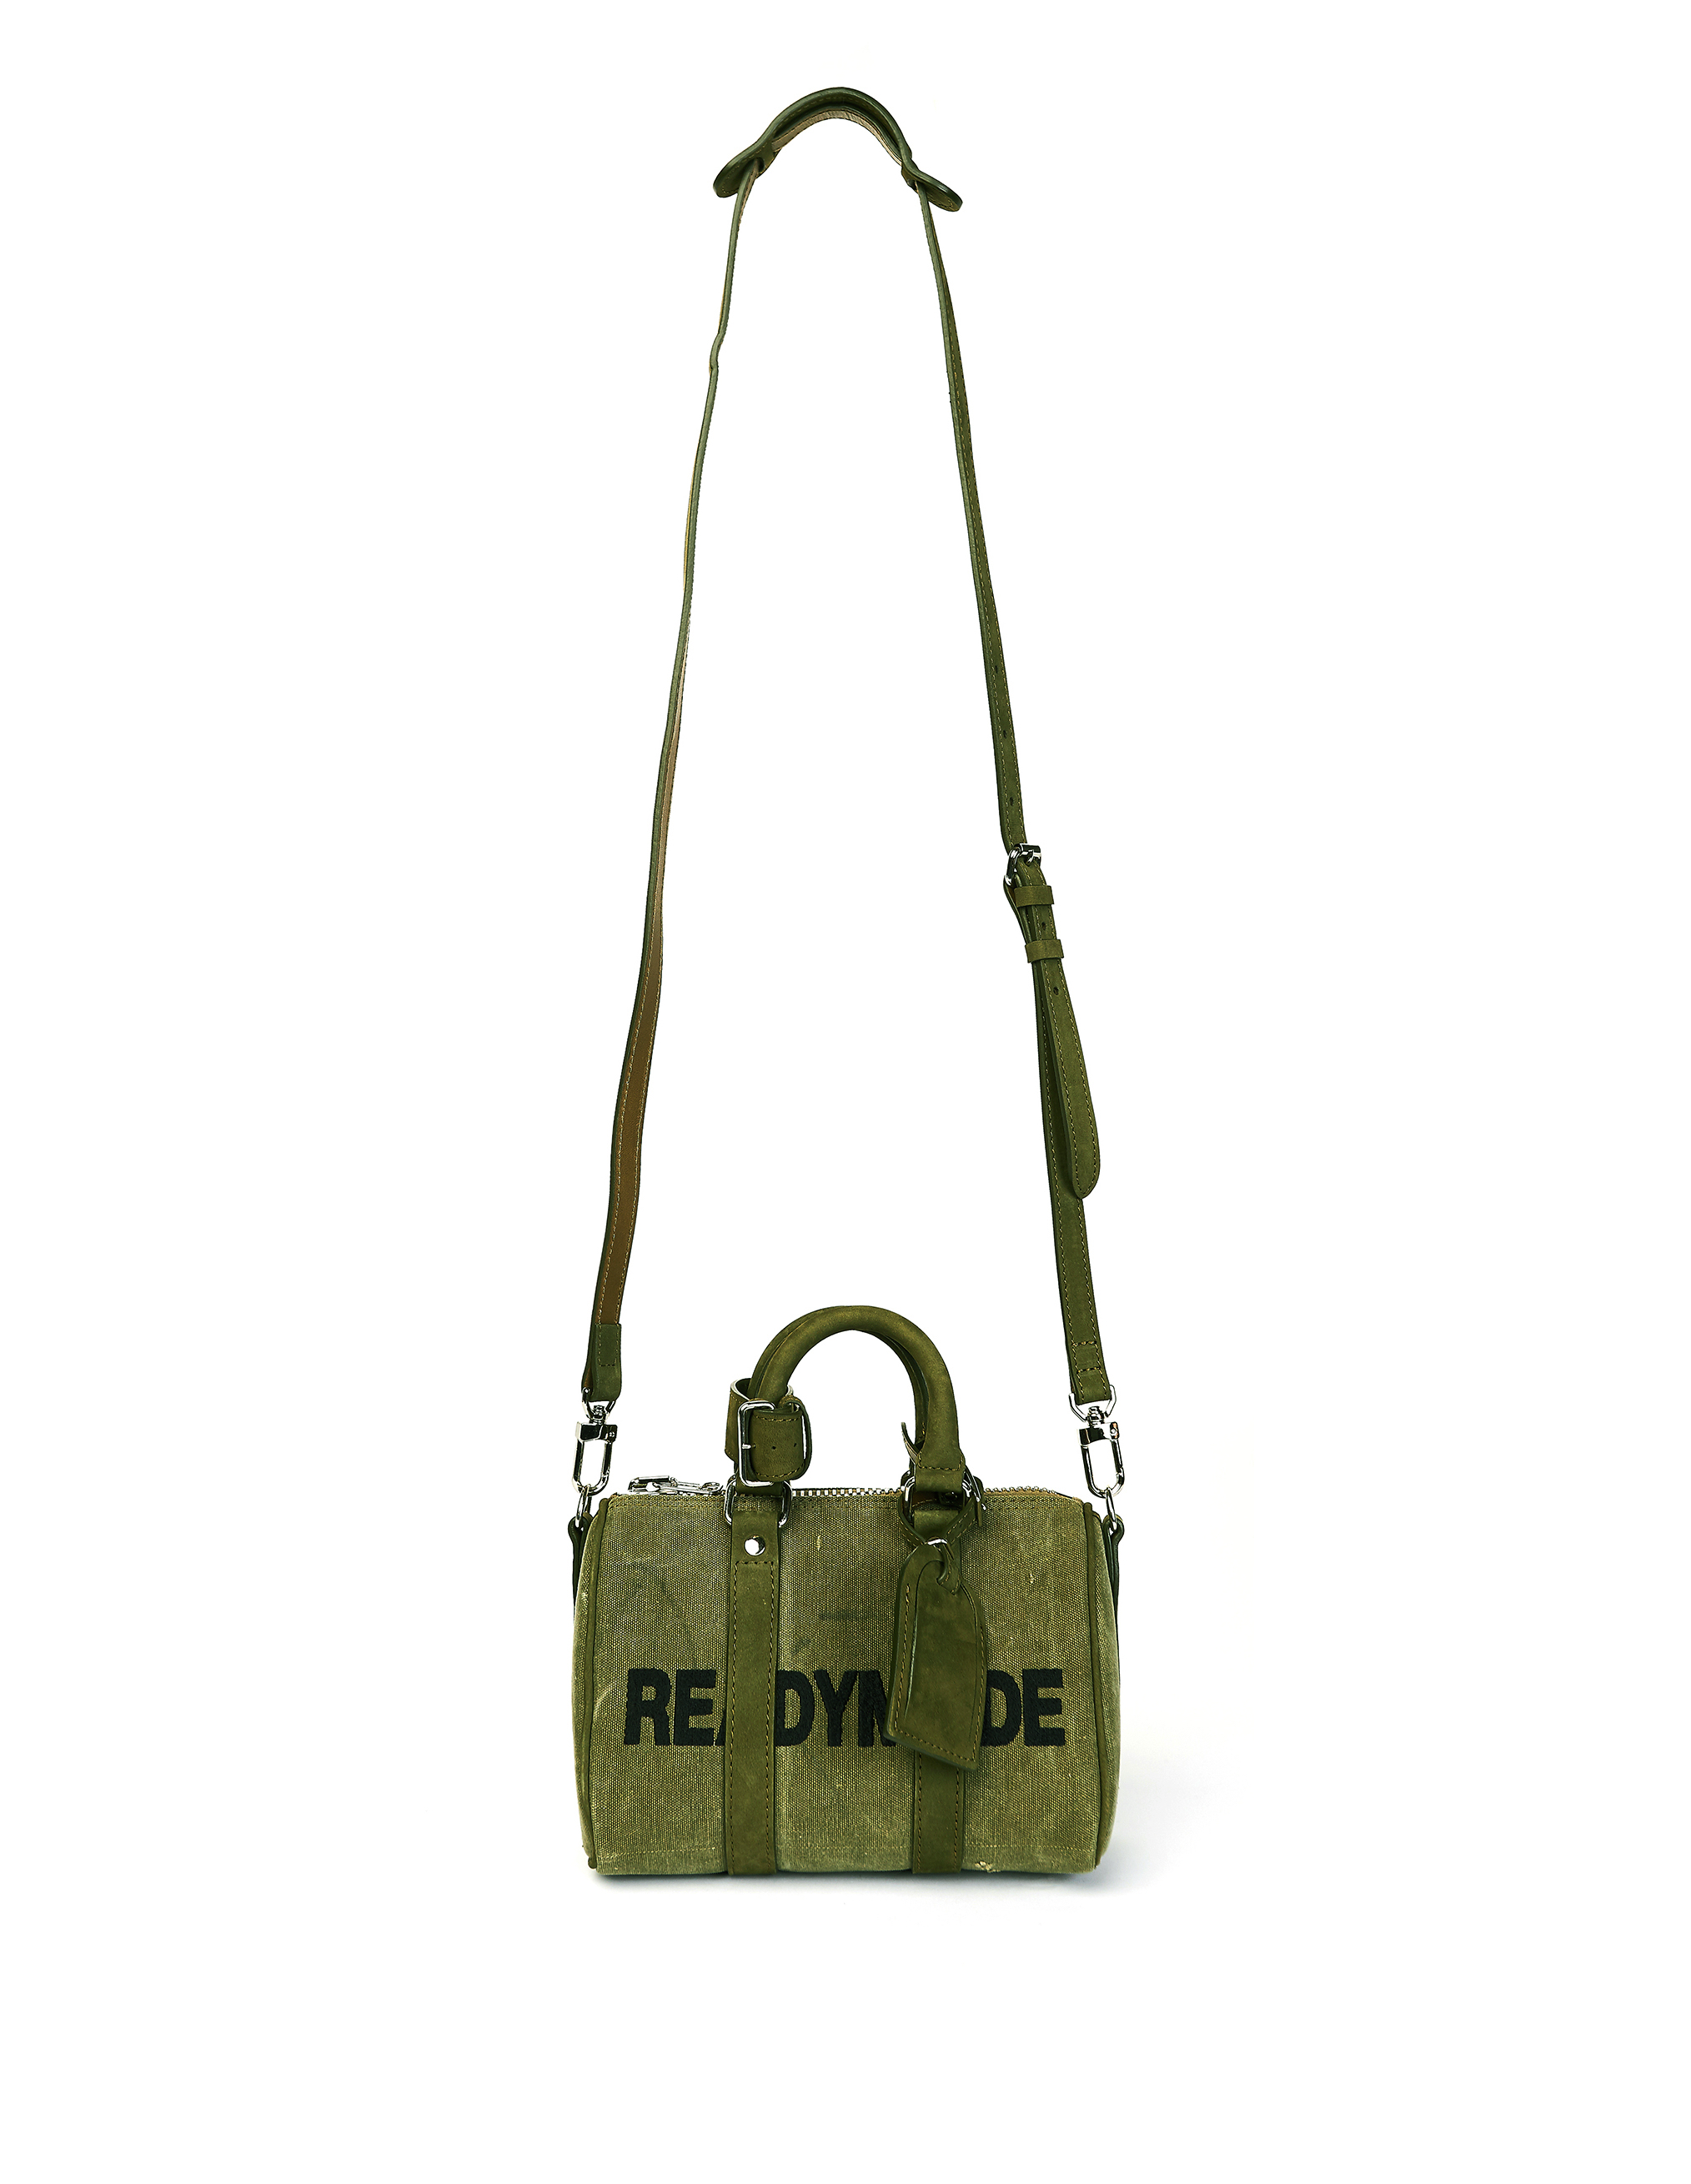 READYMADE READYMADE EMBROIDERED SMALL KHAKI BAG,RE-CK-KH-00-00-49/GRN